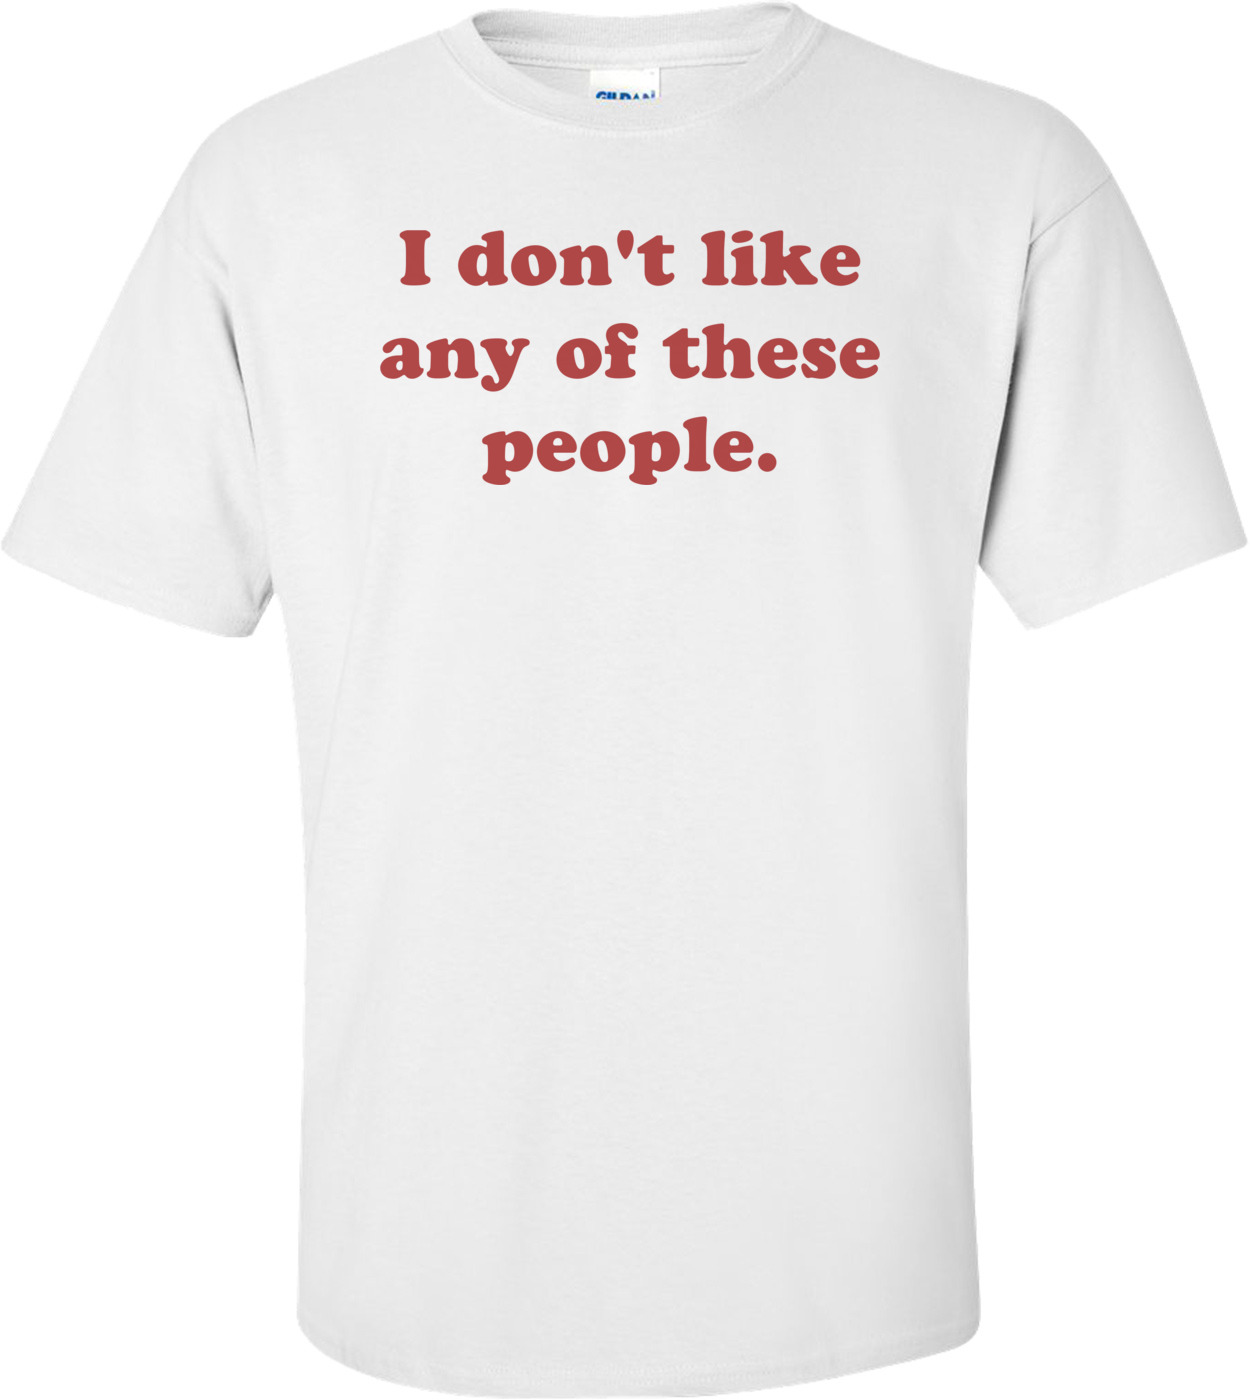 i-dont-like-any-of-these-people-shirt-3p.jpg